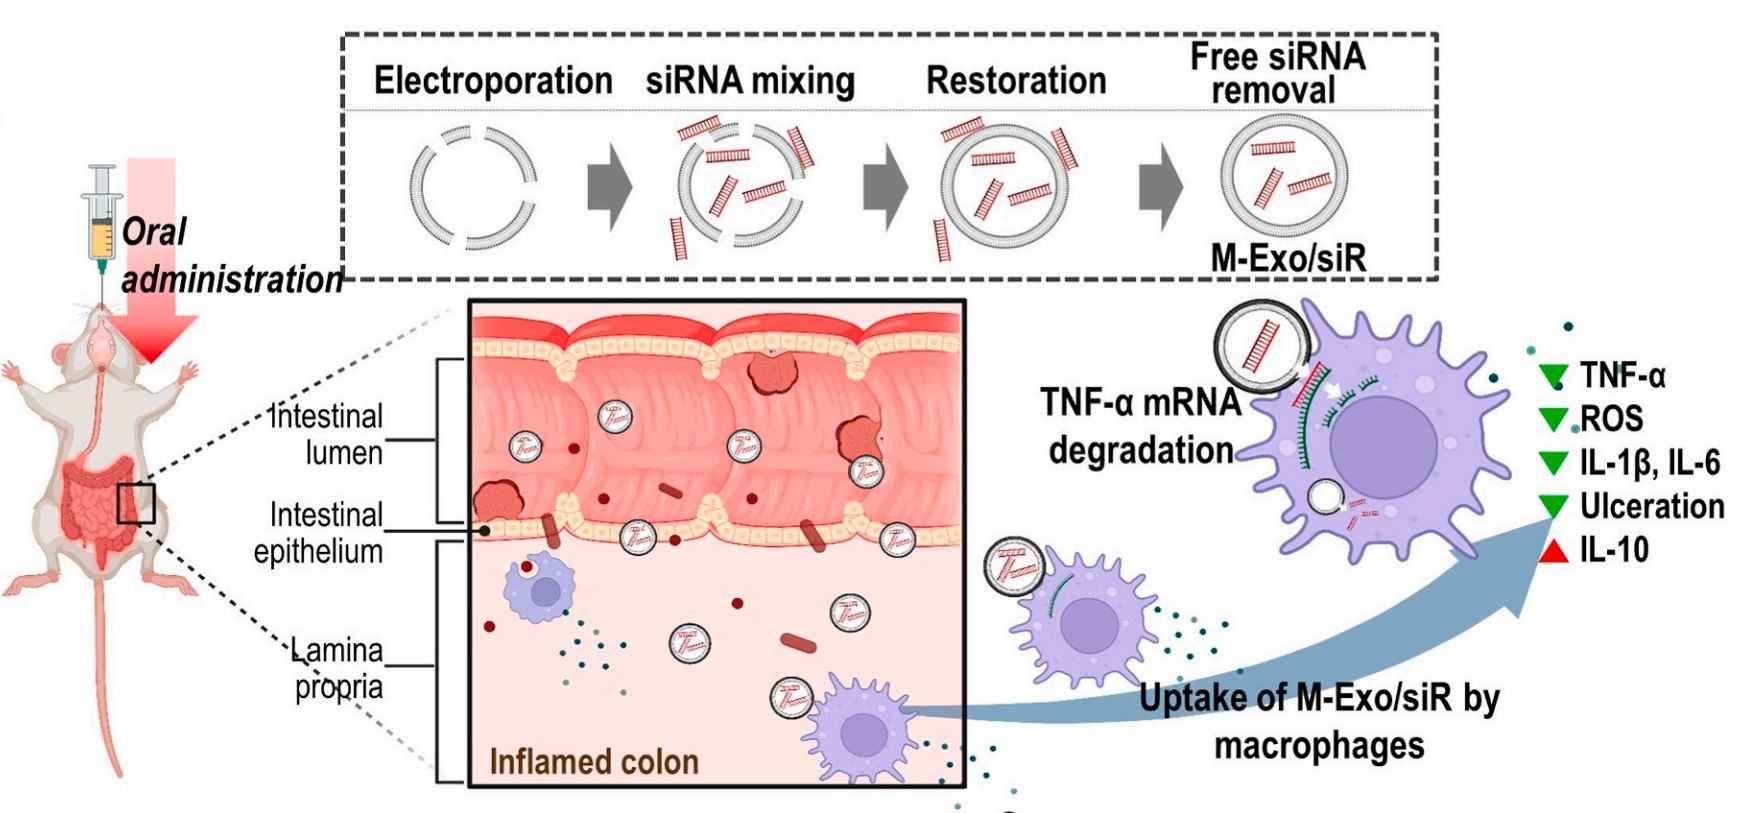 Figure 2. Delivery of TNF-α siRNA by M-Exos.